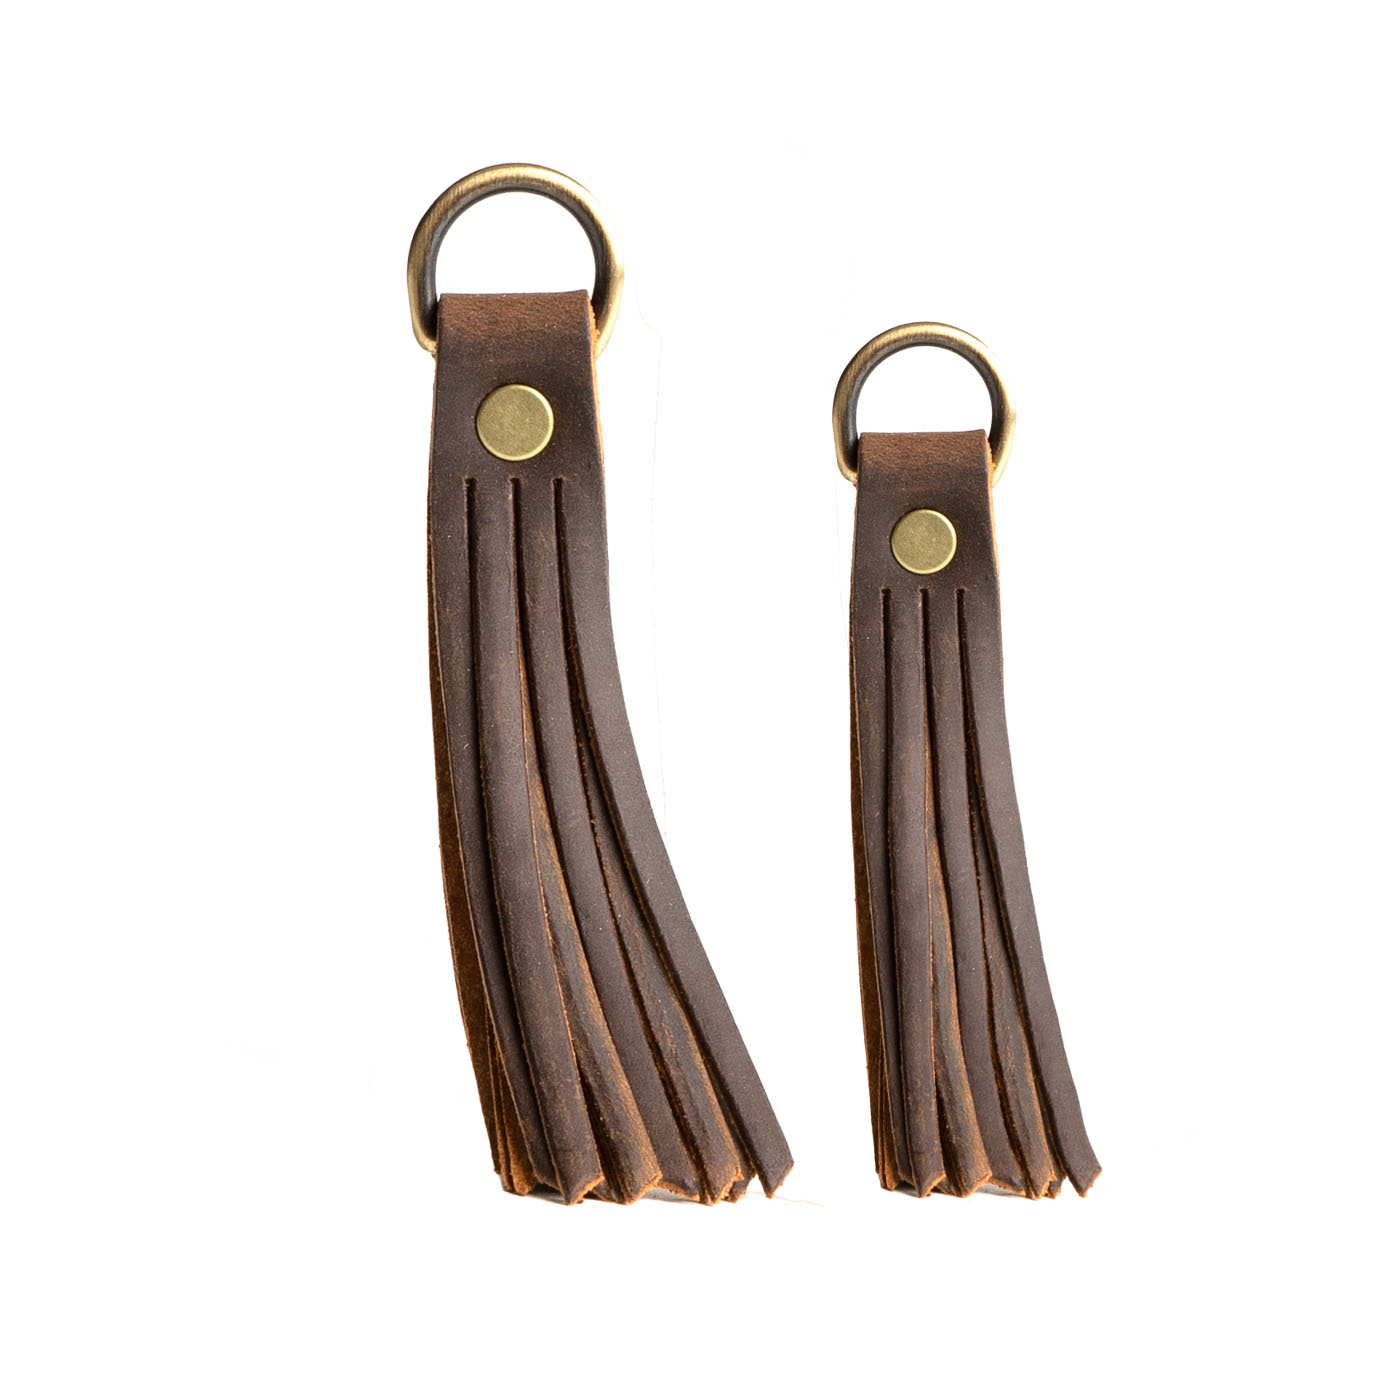 Wholesale Leather Tassel Keychain Products at Factory Prices from  Manufacturers in China, India, Korea, etc.